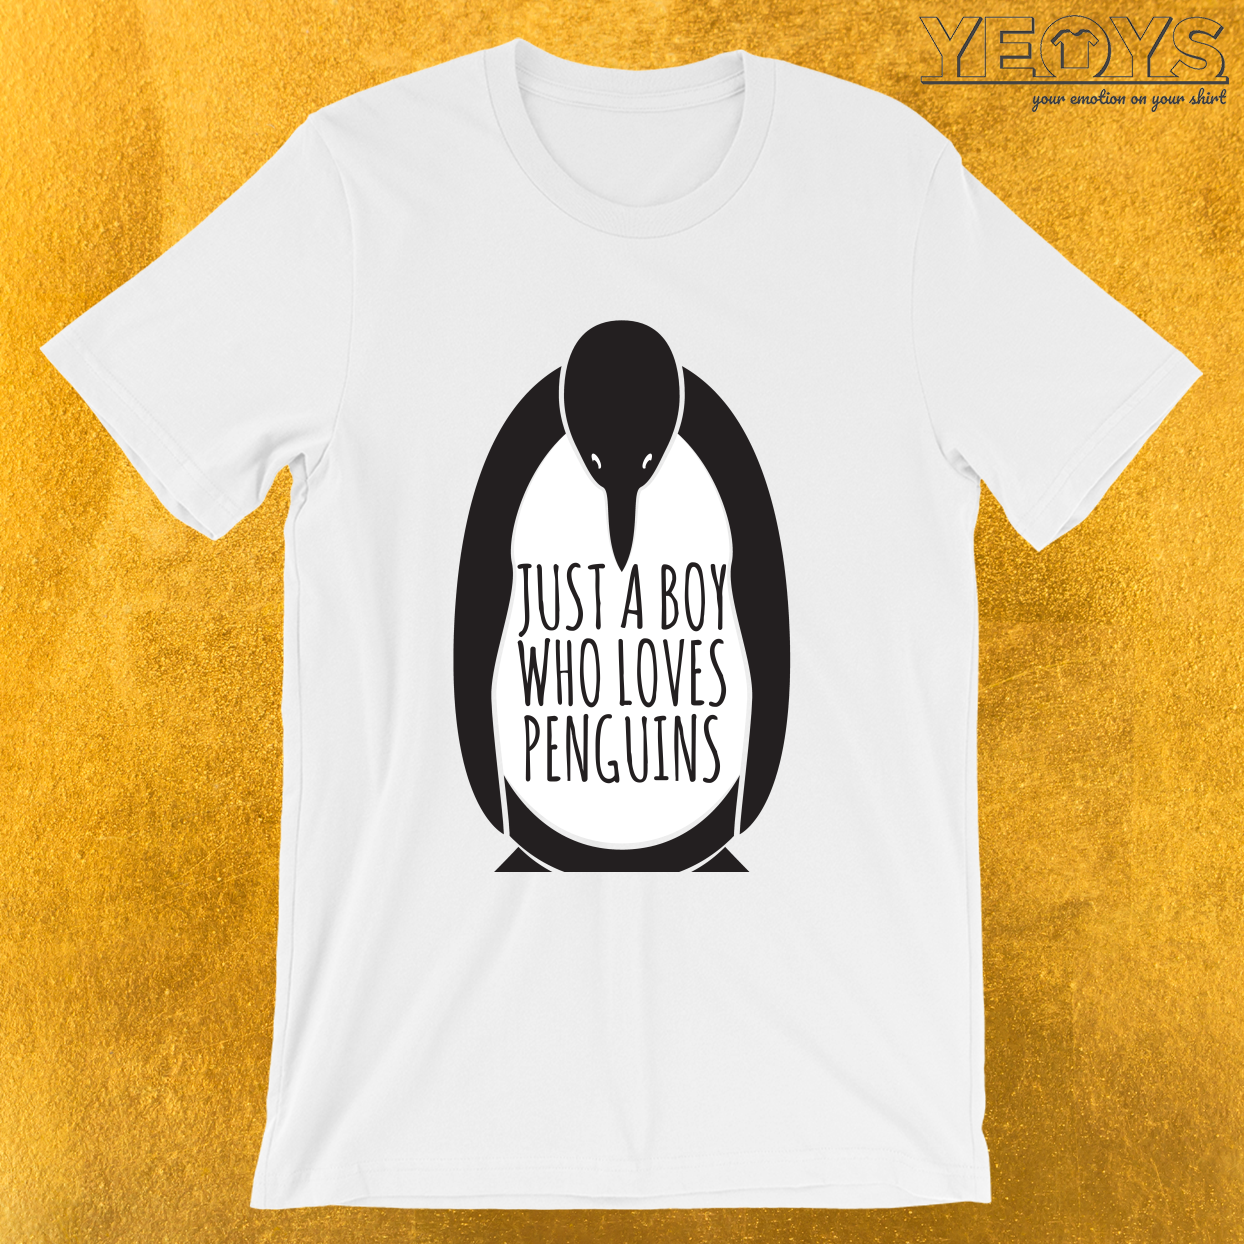 Just A Boy Who Loves Penguins – Funny Penguin Tee